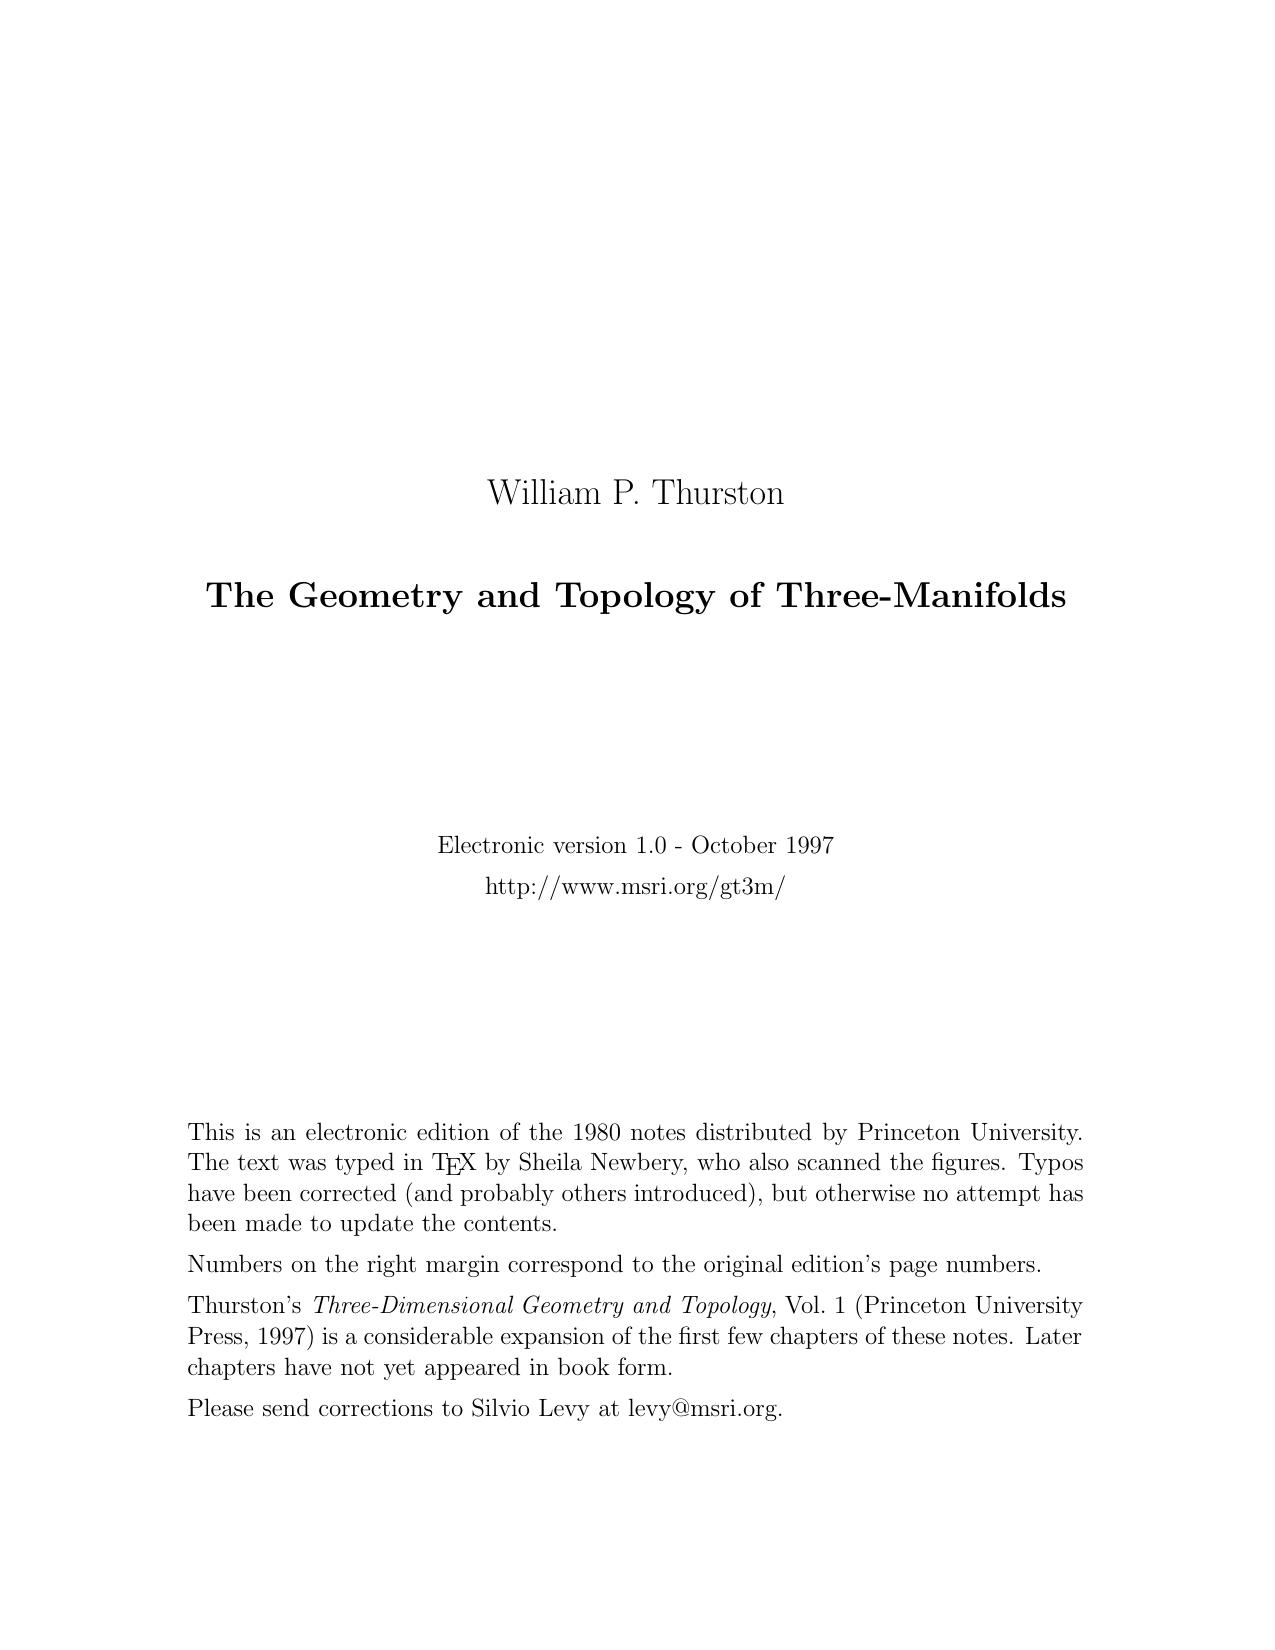 The Geometry & Topology of Three-Manifolds